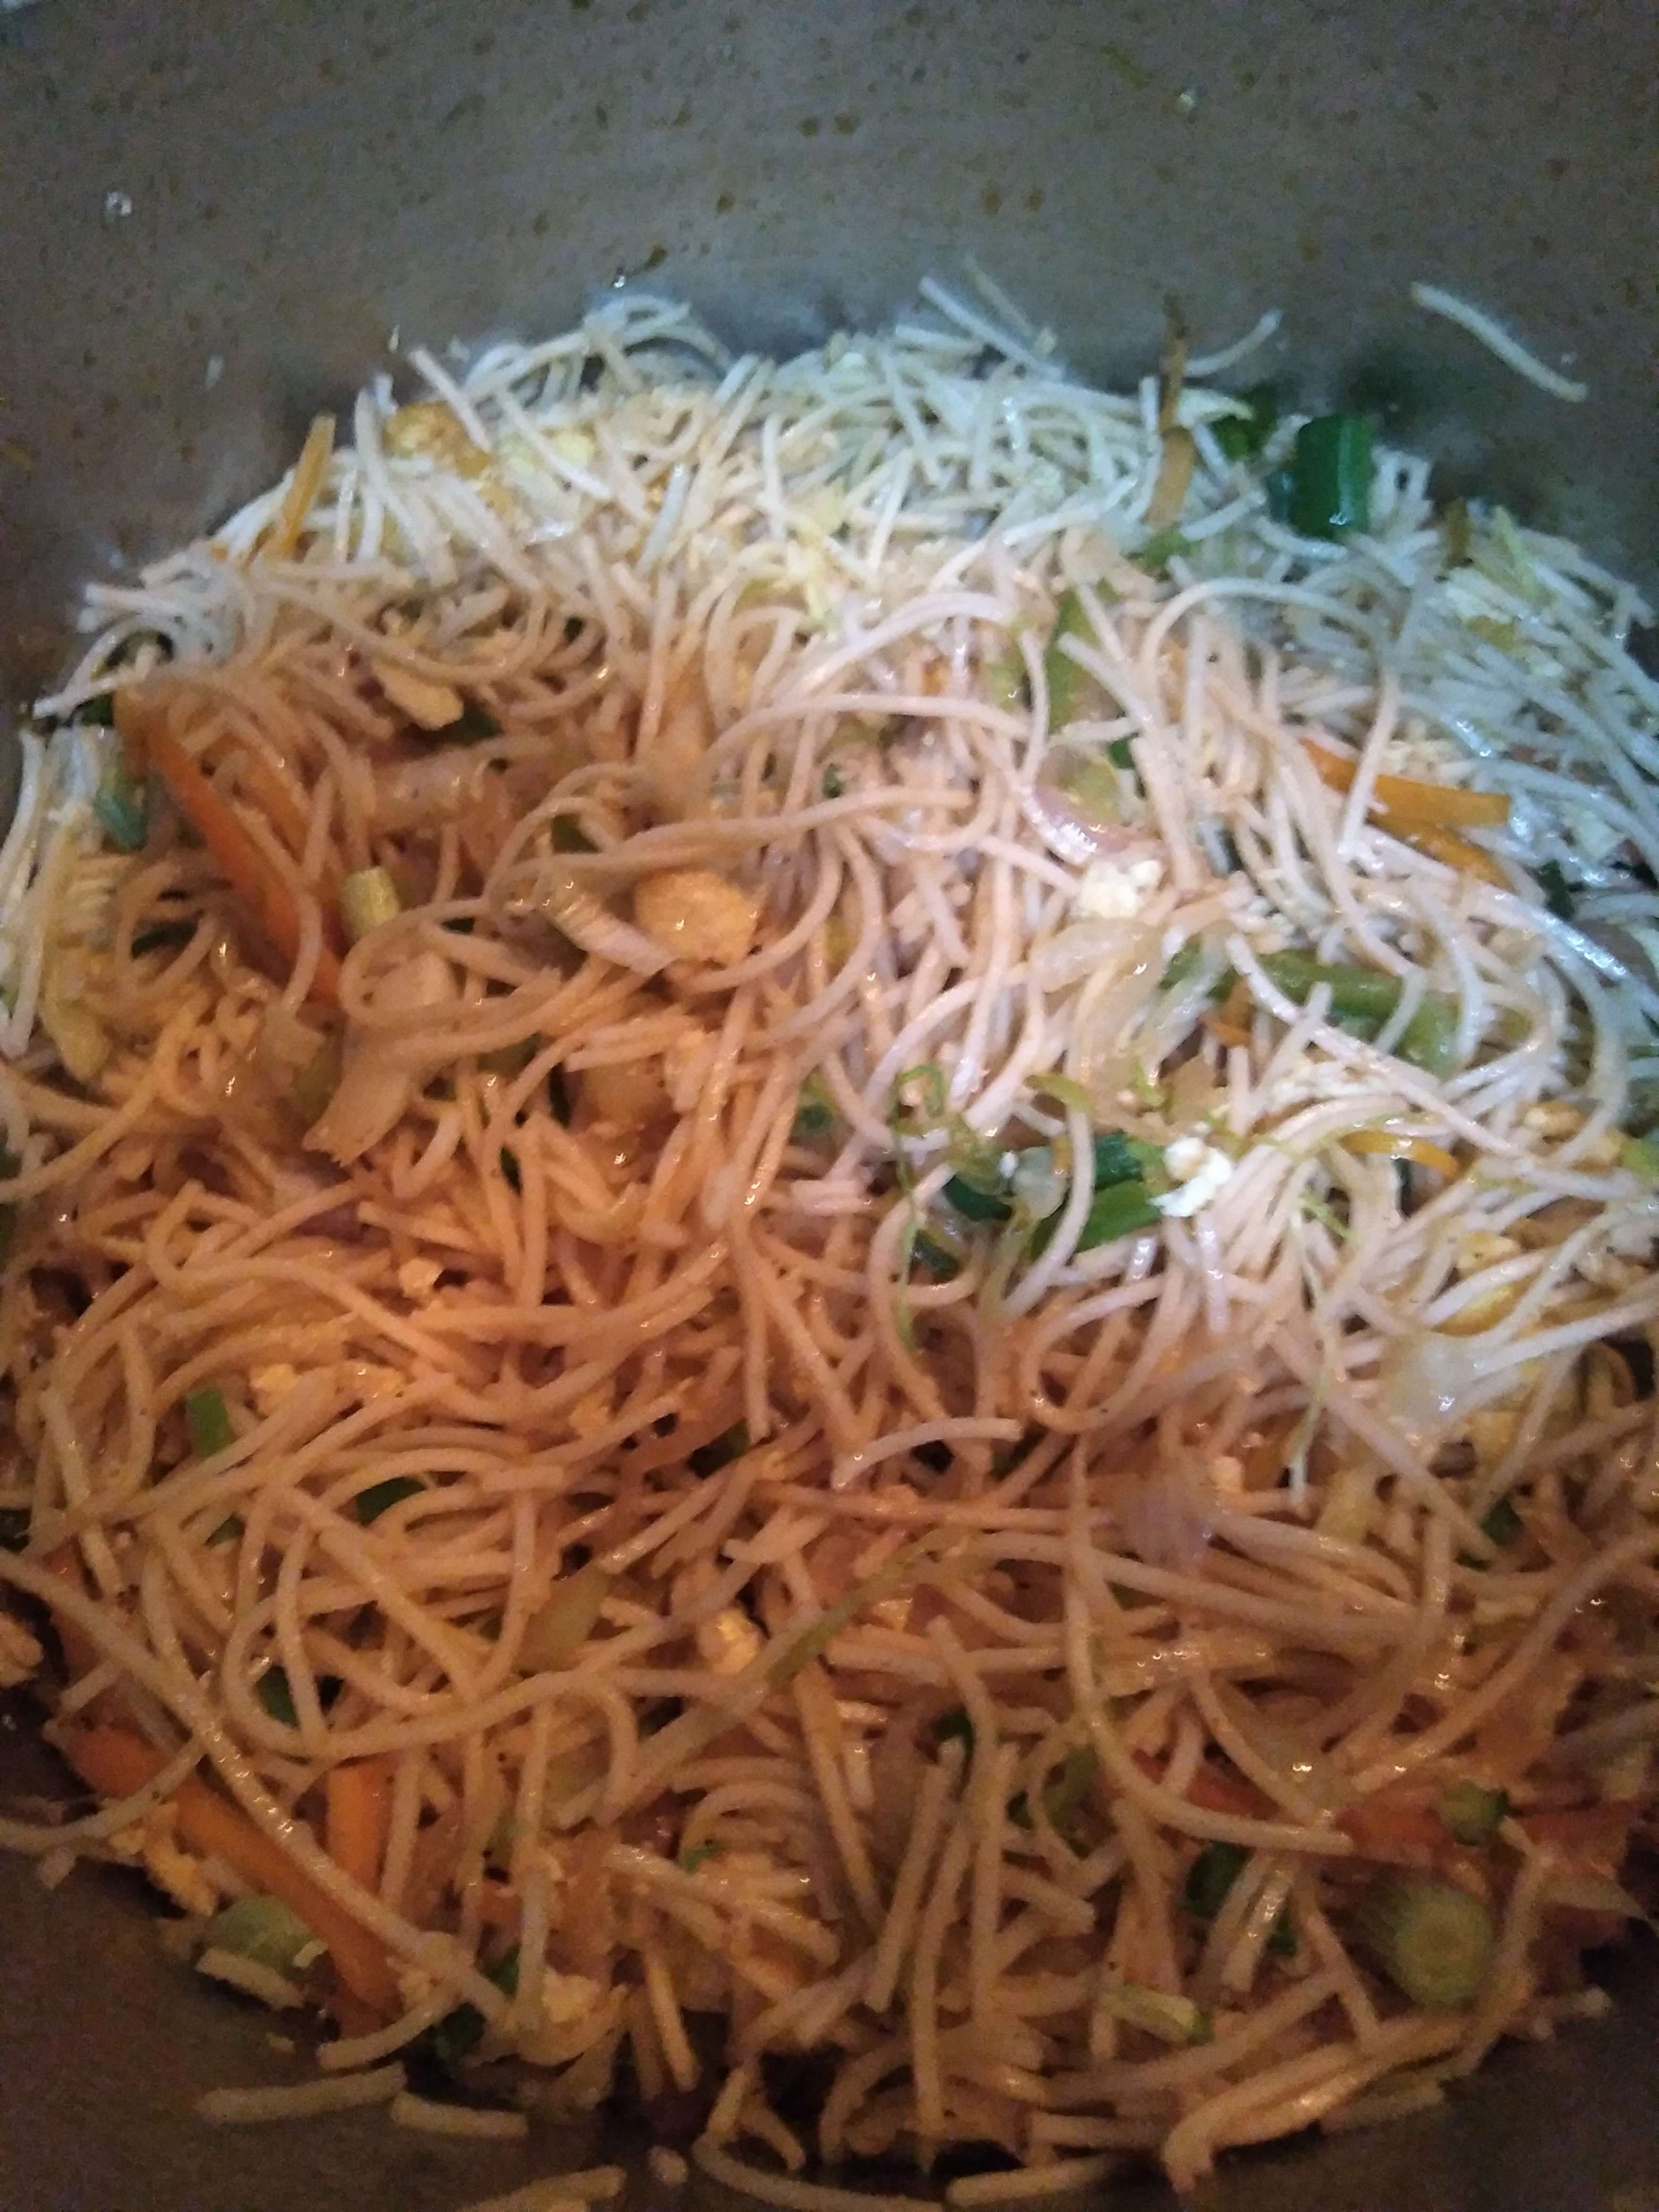 Tasty Egg Noodles cooked by COOX chefs cooks during occasions parties events at home